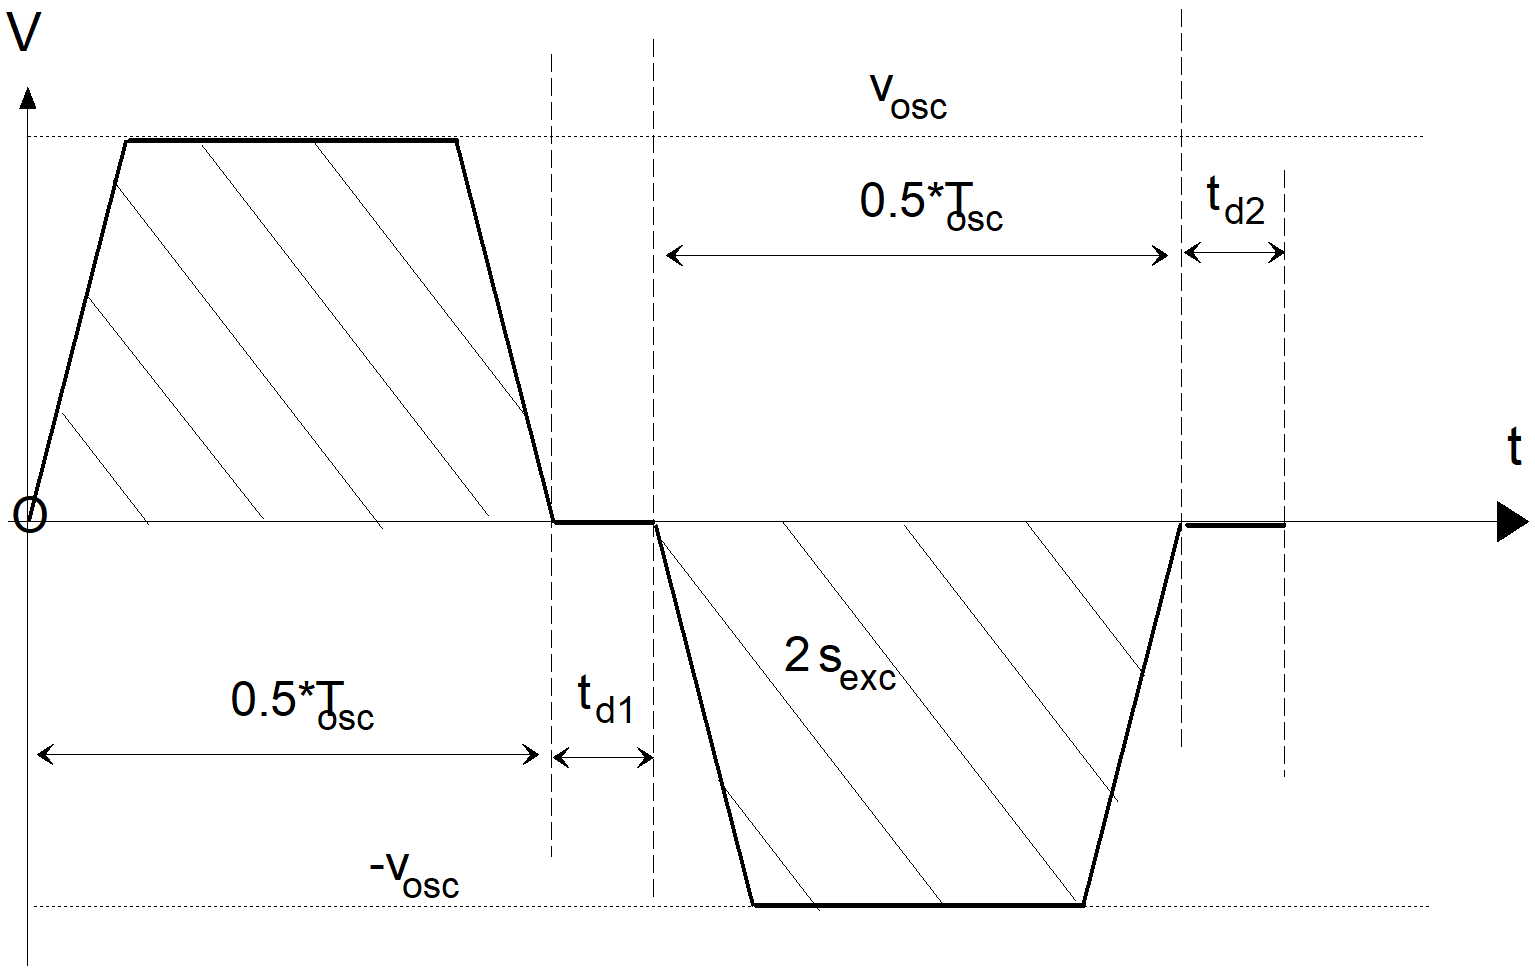 Oscillating motion in the time range with linear slope profile